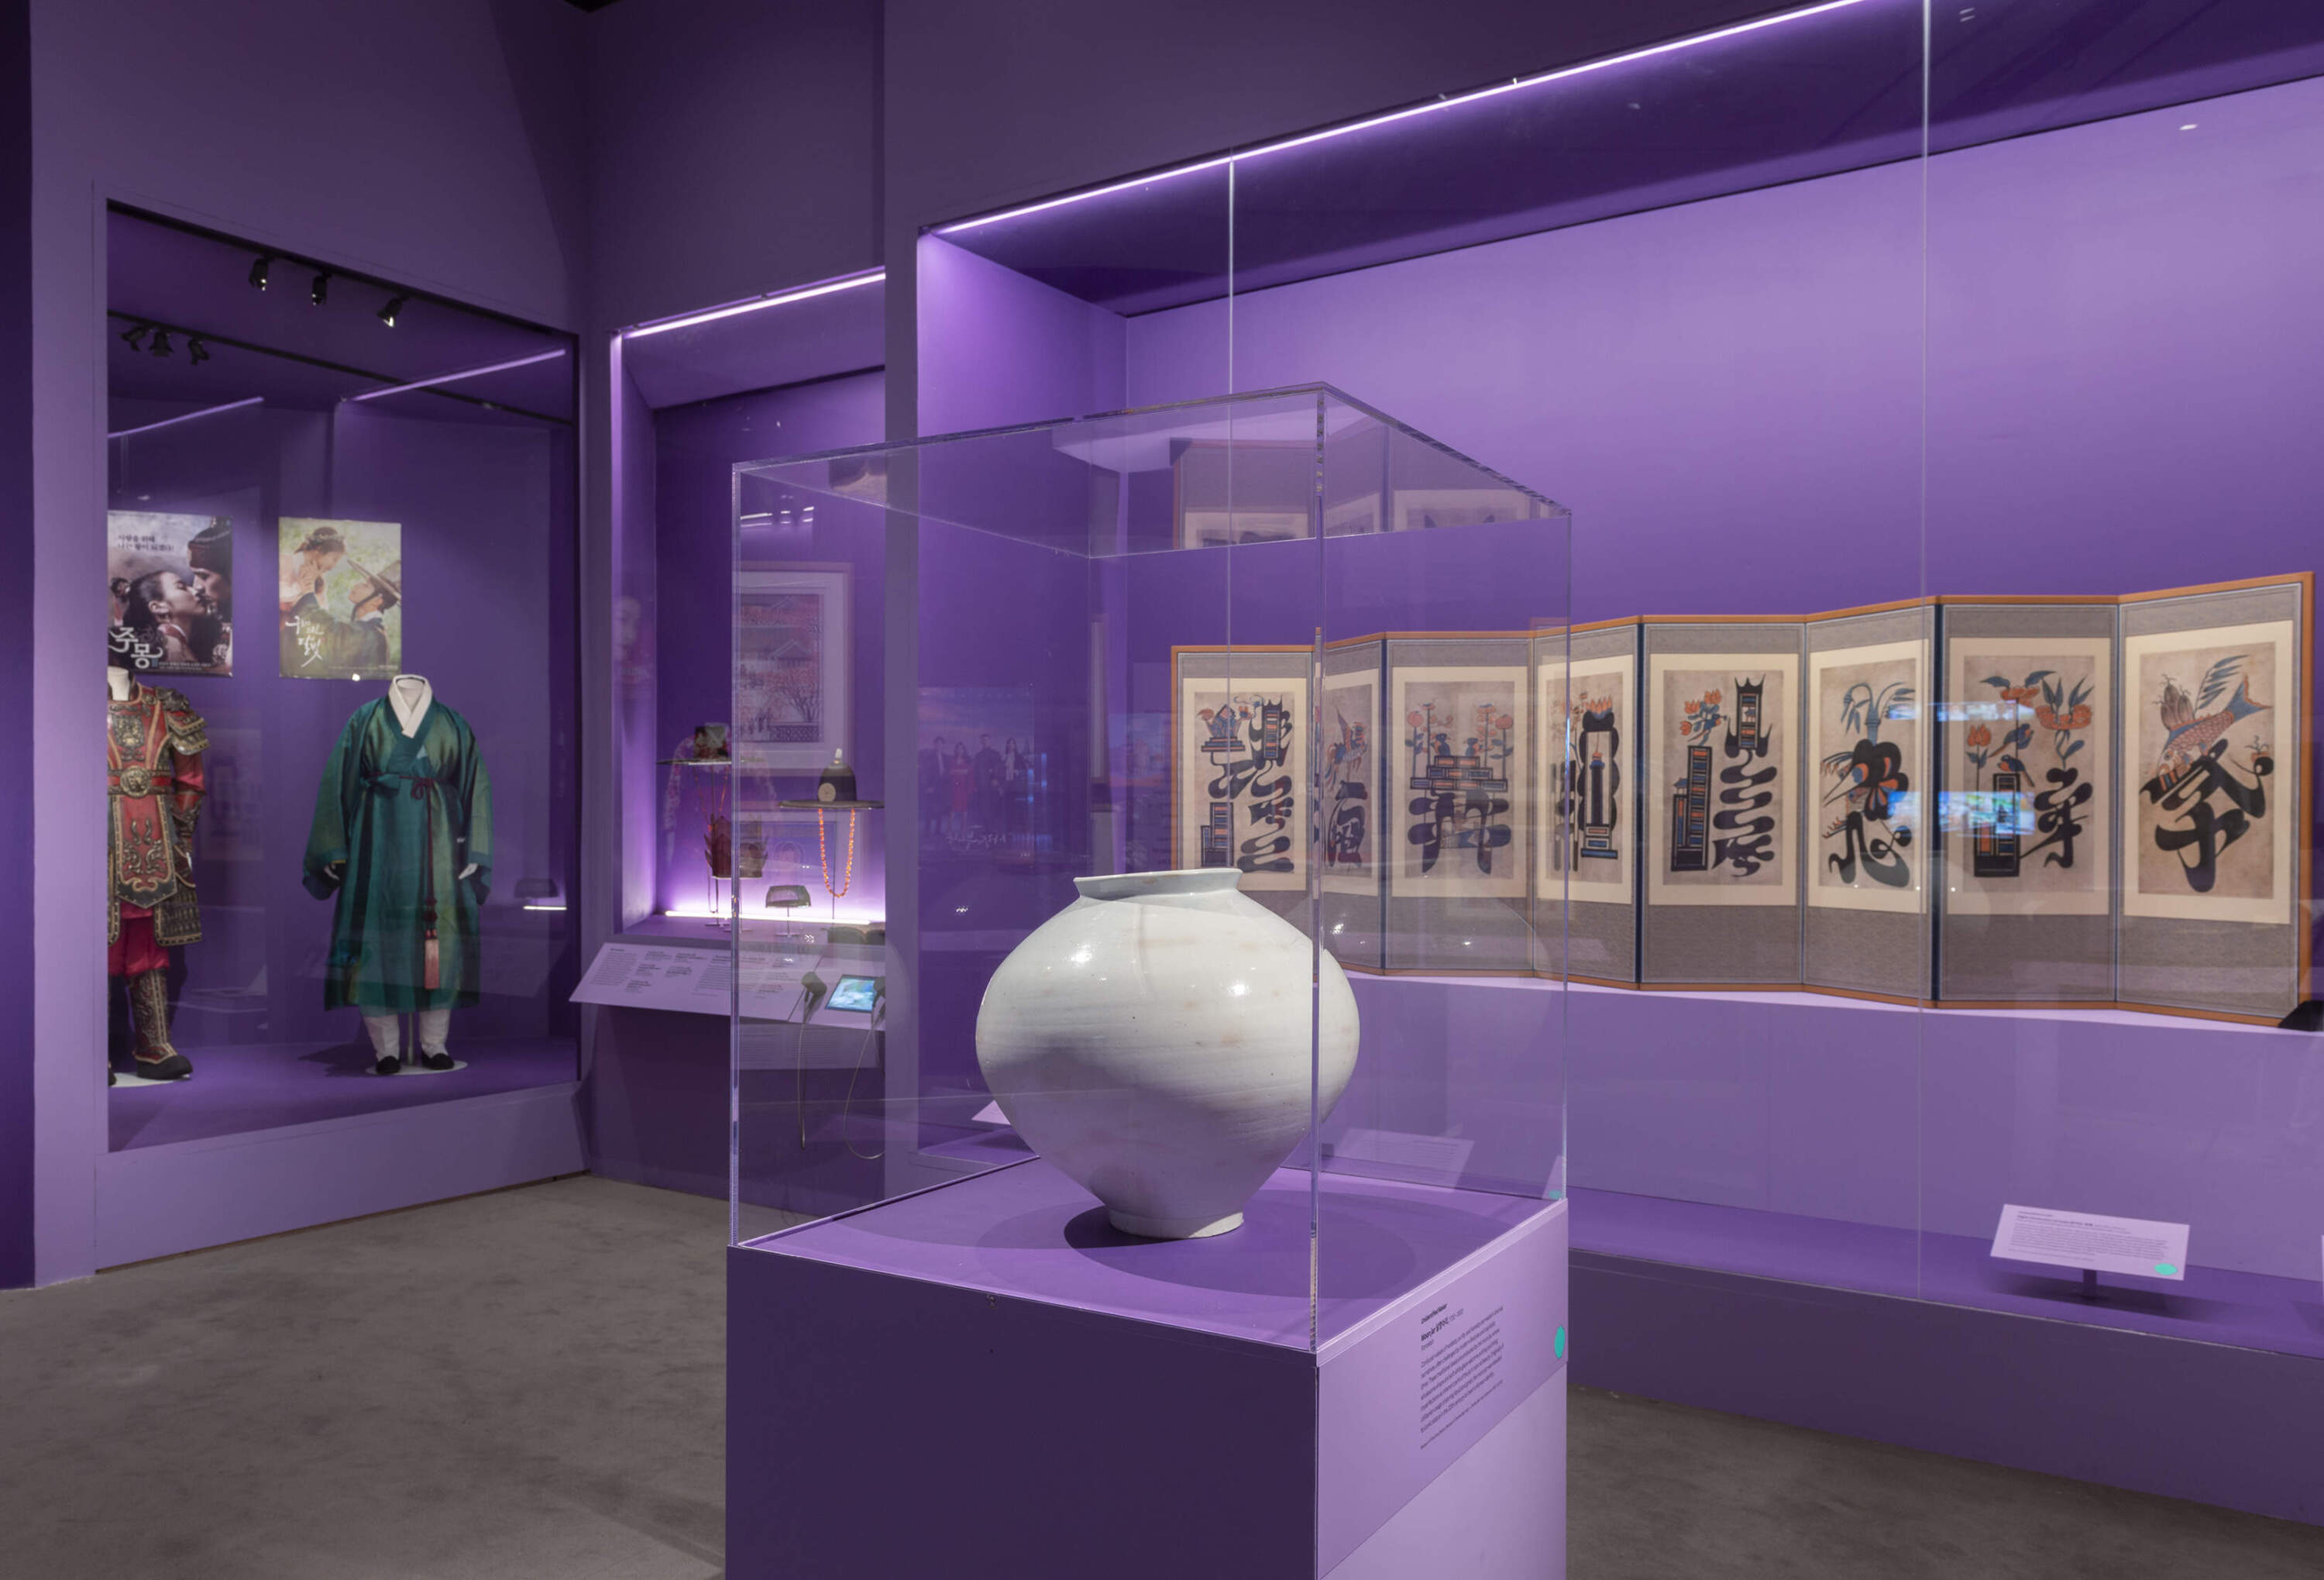 The exhibition also features objects from the museum's collection of Korean art. (Courtesy Museum of Fine Arts, Boston)